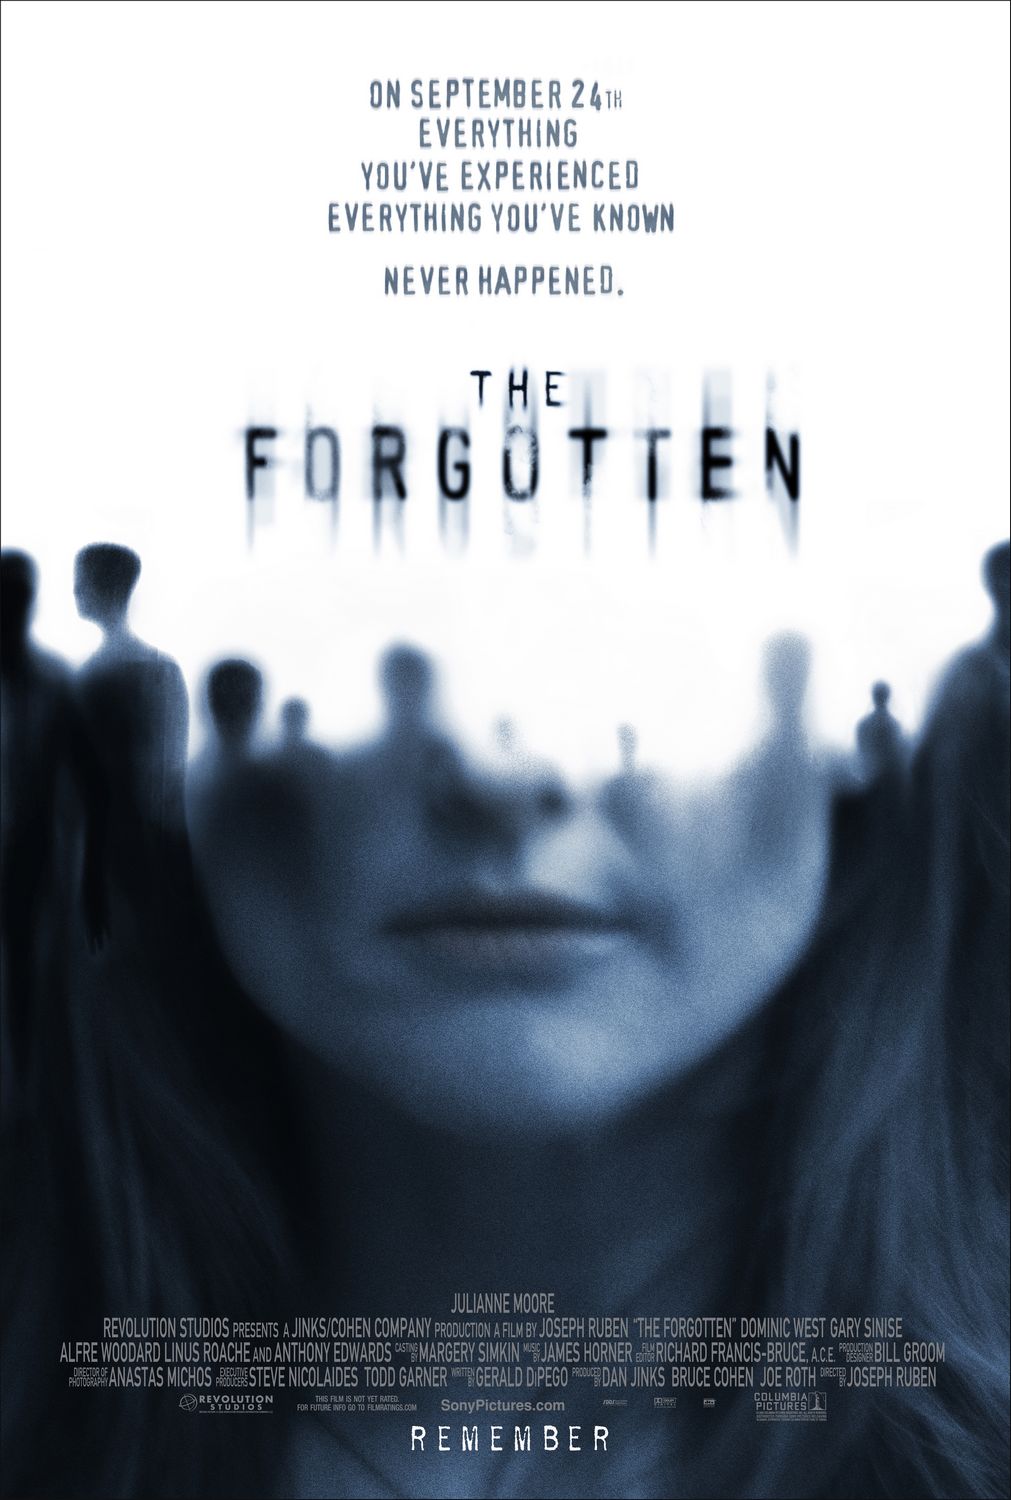 Extra Large Movie Poster Image for The Forgotten 